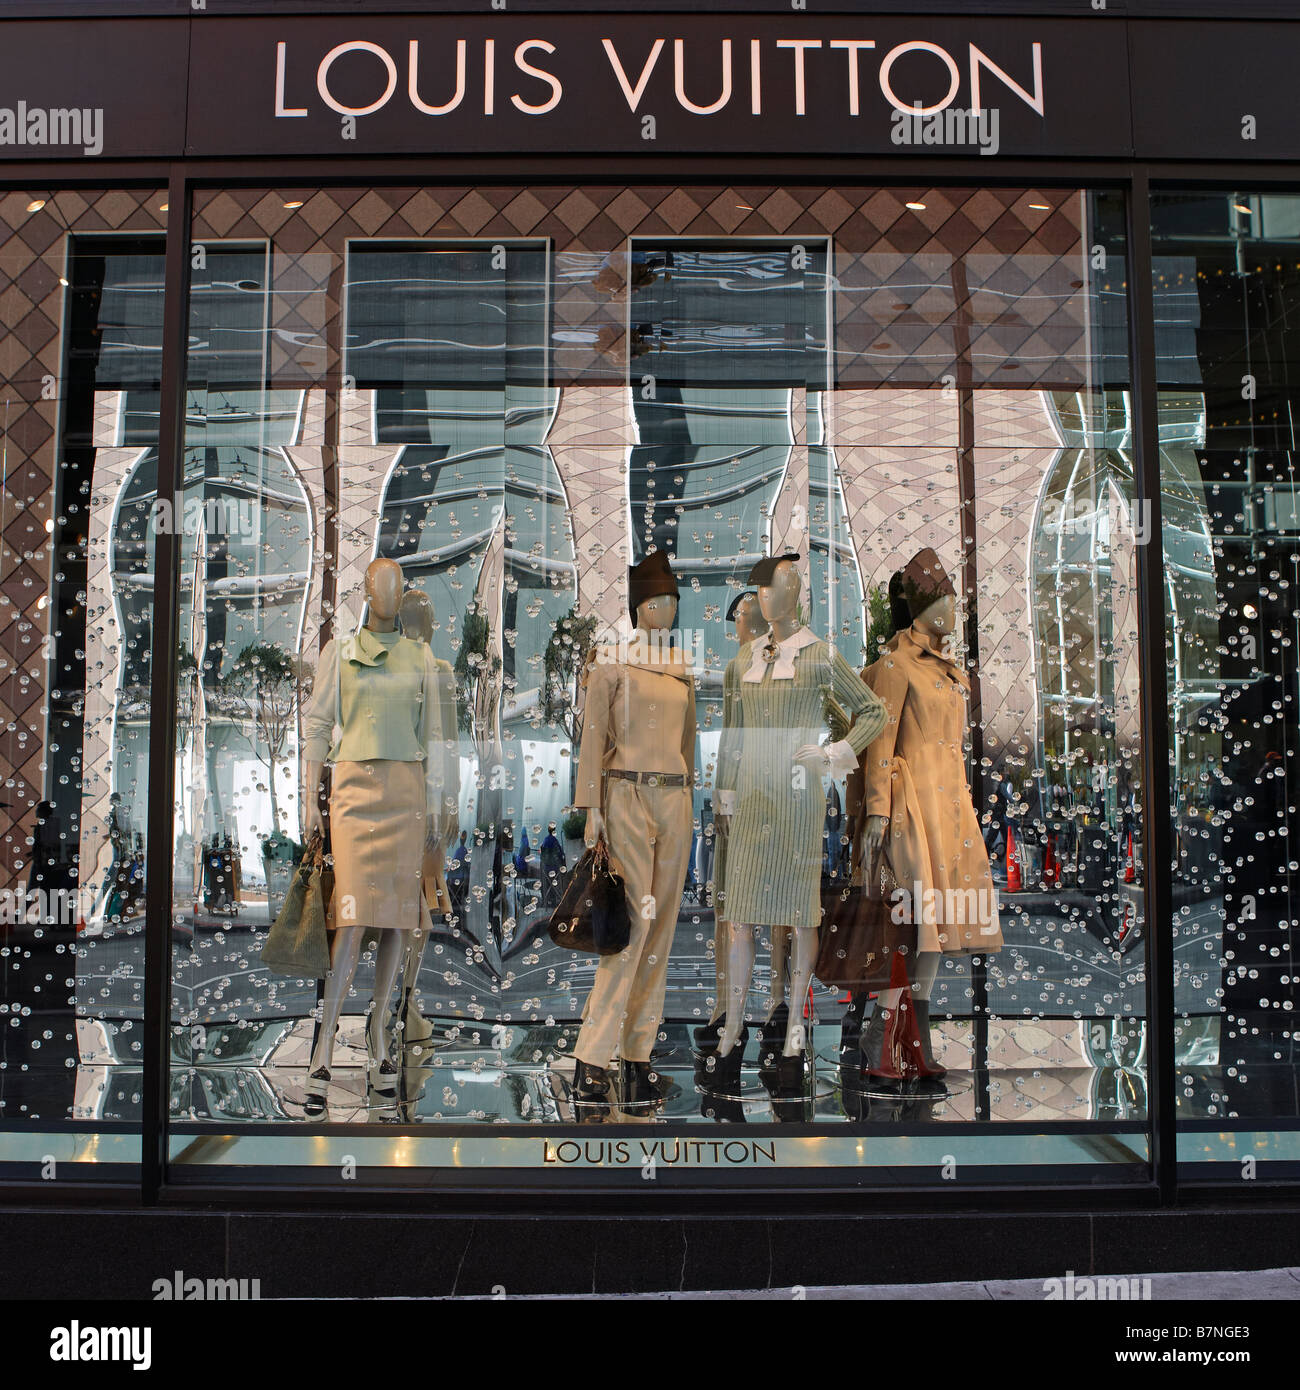 What happened at the Louis Vuitton store in San Francisco, California?